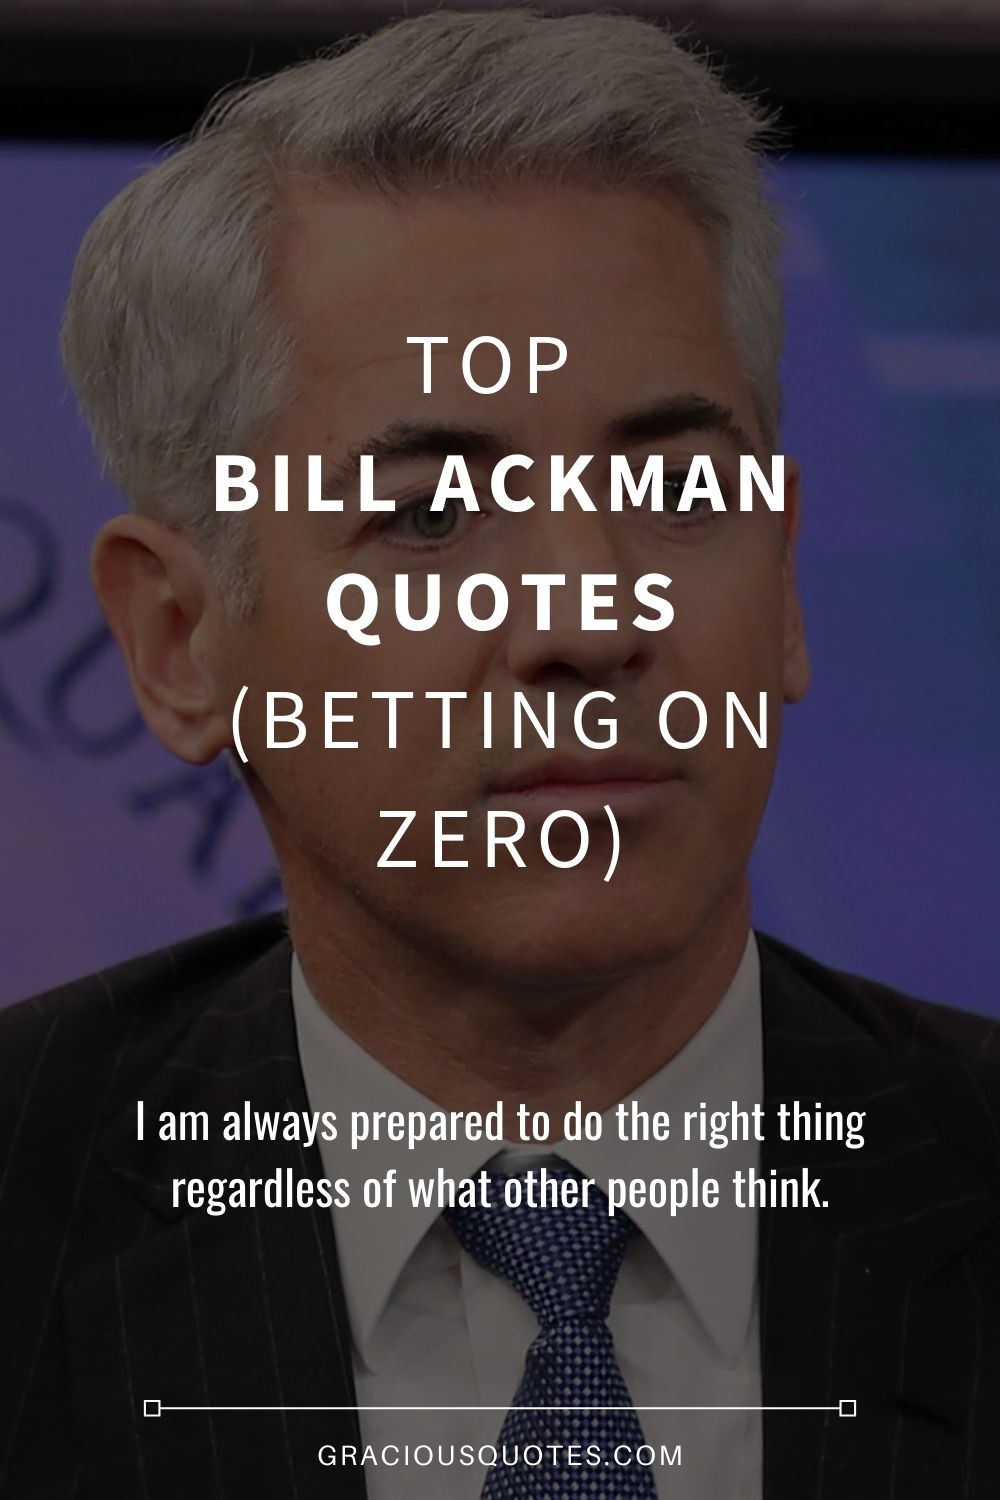 Top Bill Ackman Quotes (BETTING ON ZERO) - Gracious Quotes